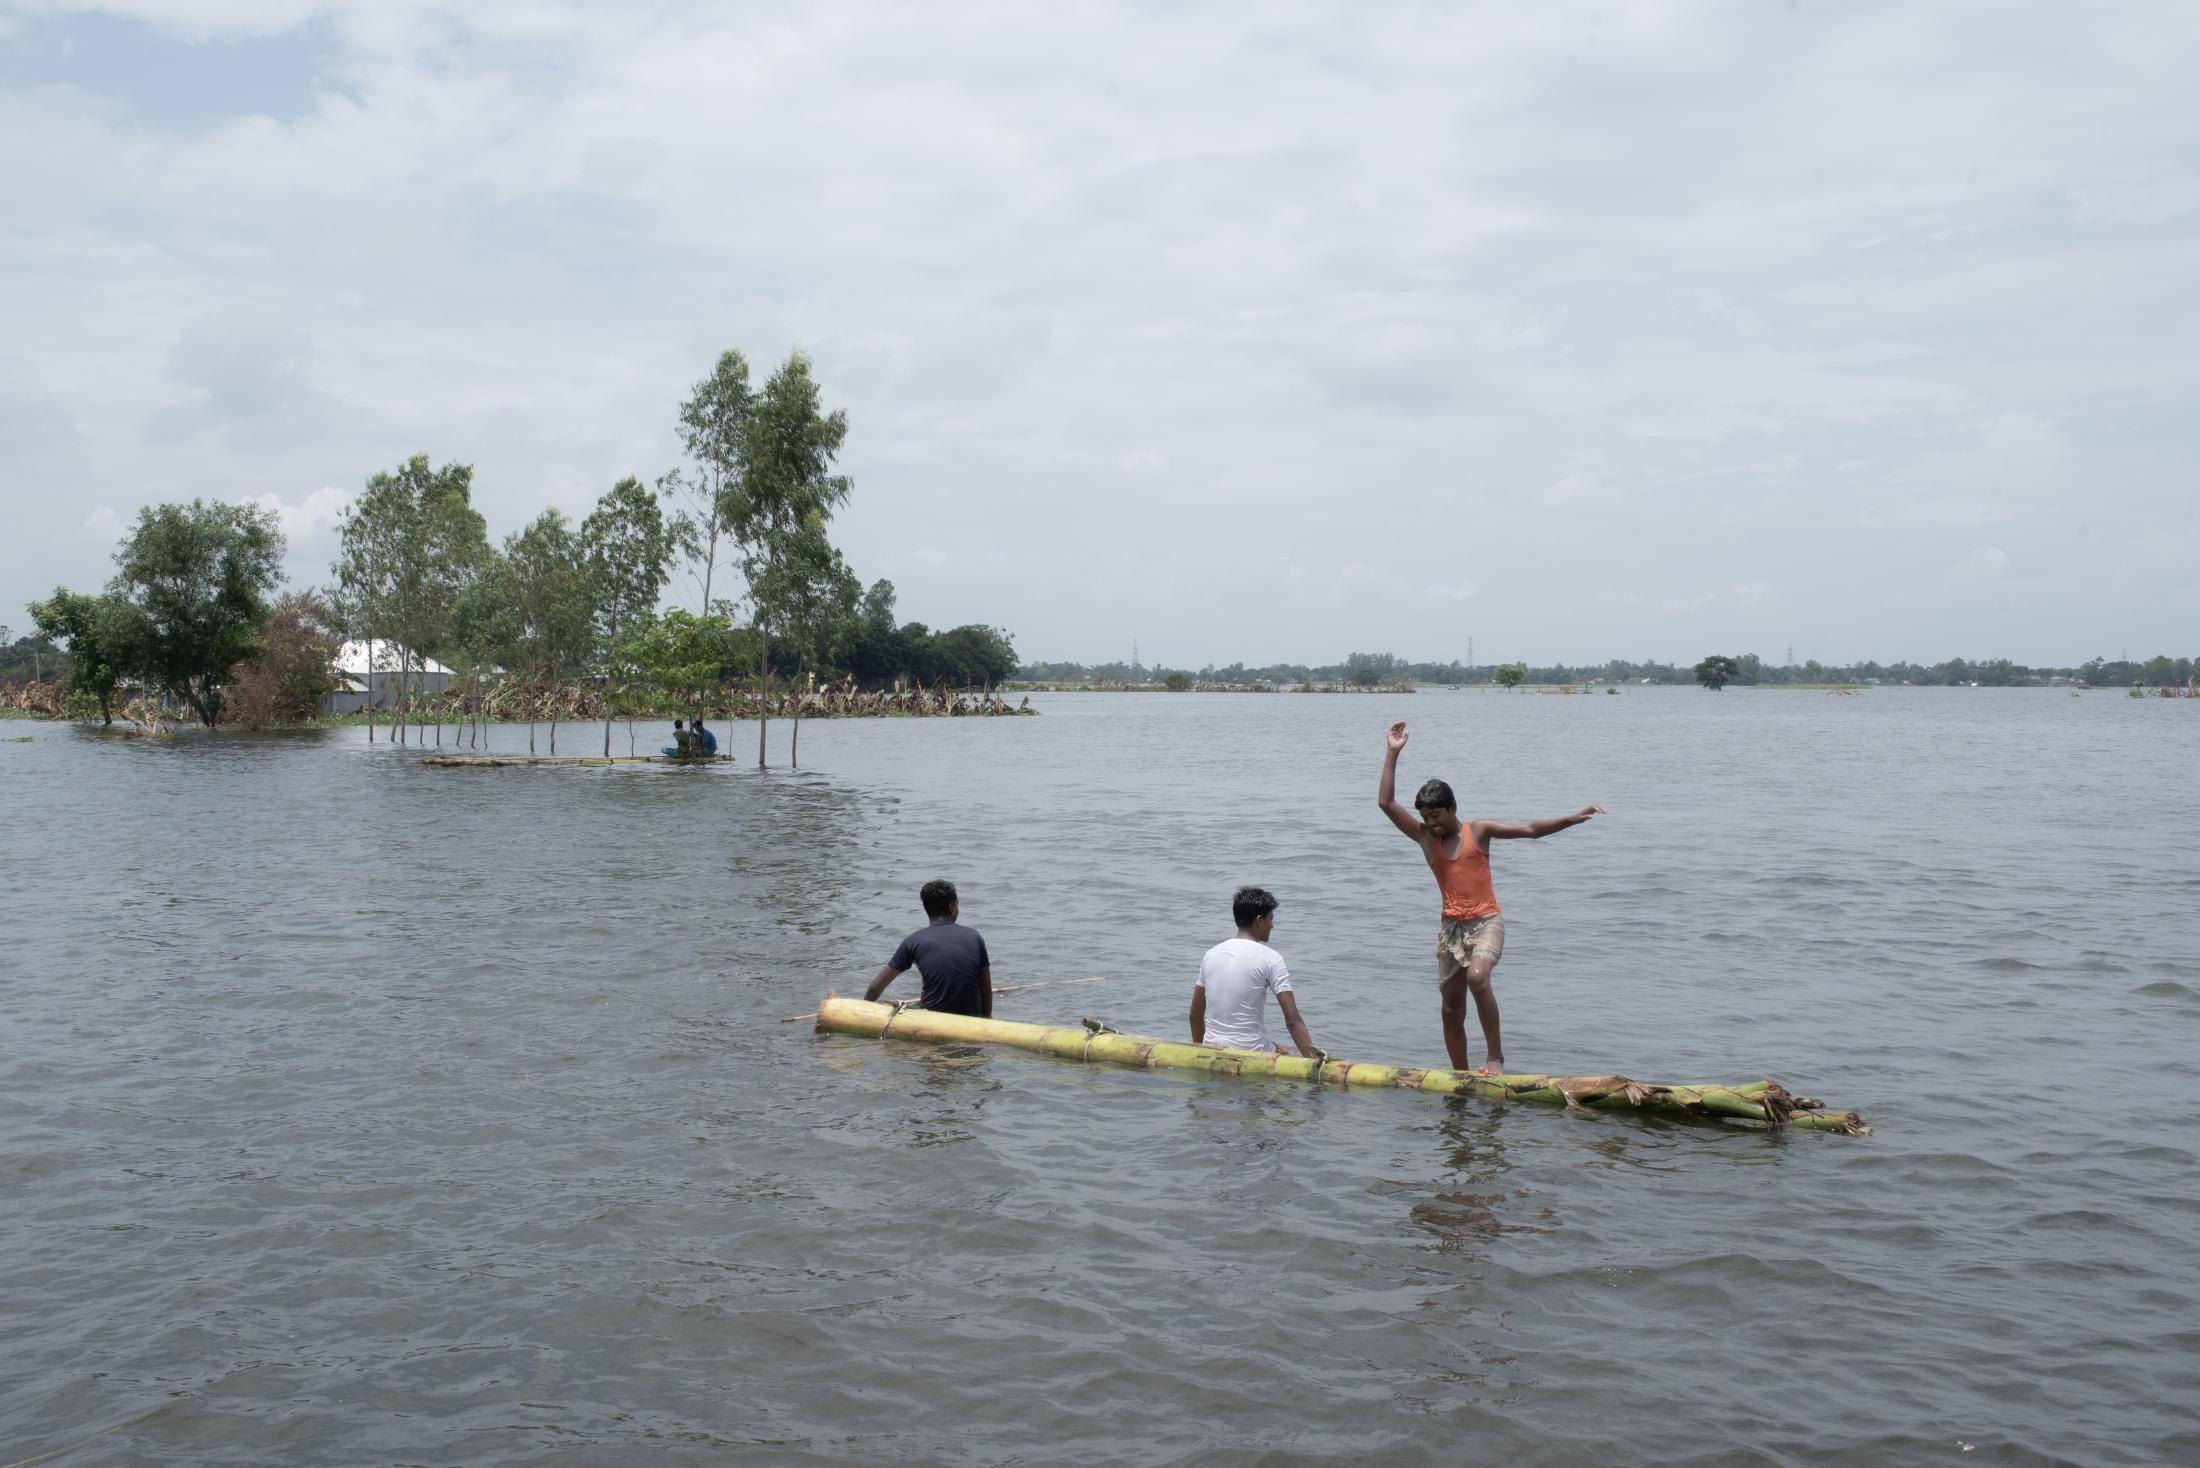 The Depth of Flood - Flood-affected people are seen in a makeshift raft after...